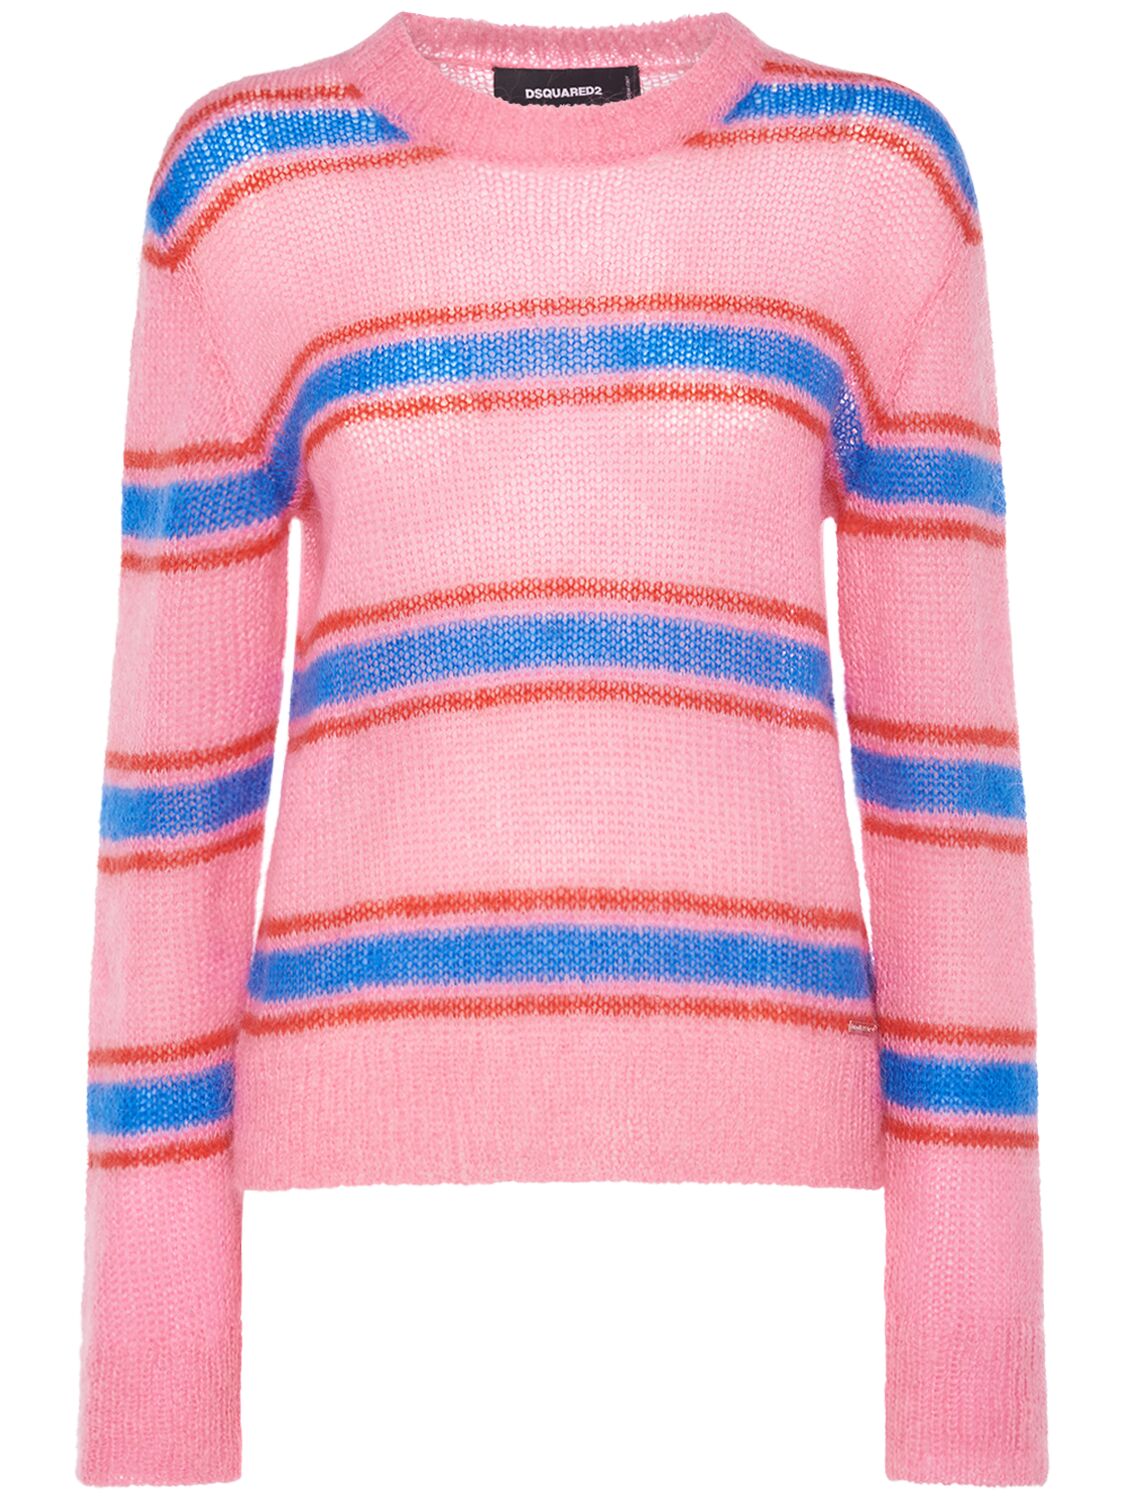 Image of Mohair Blend Striped Crewneck Sweater